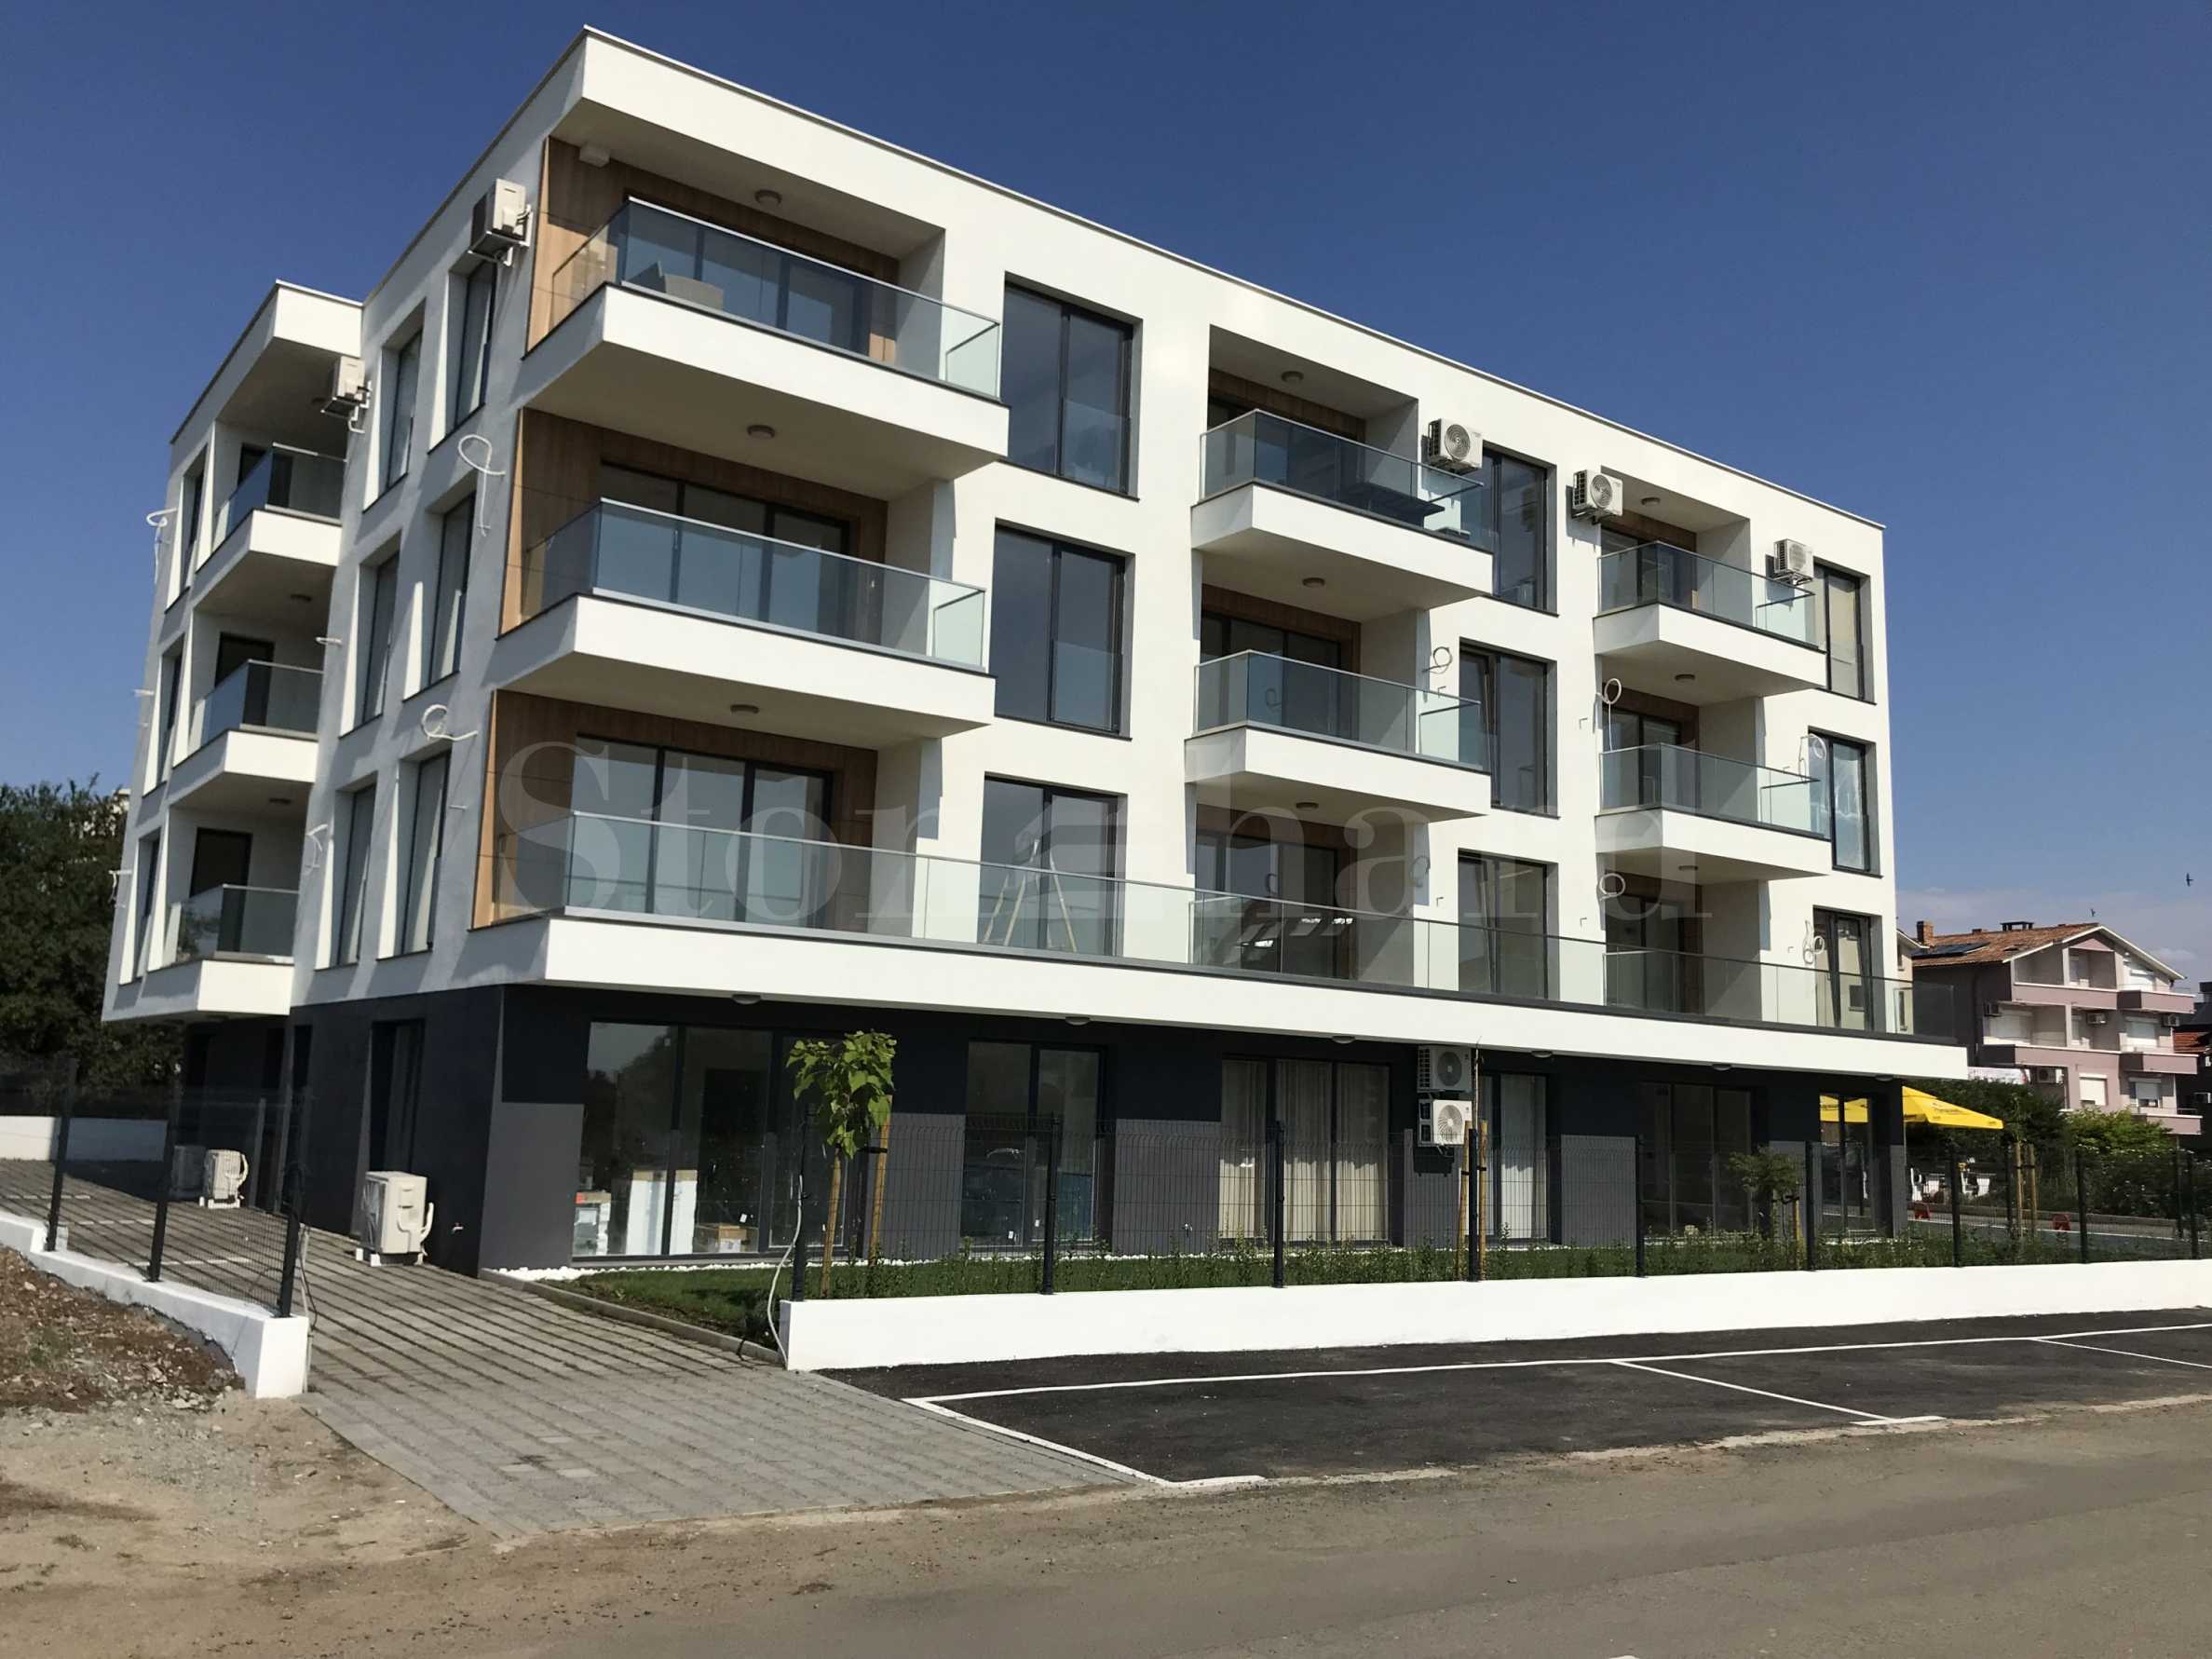 Newly built apartments in Chernomorets1 - Stonehard